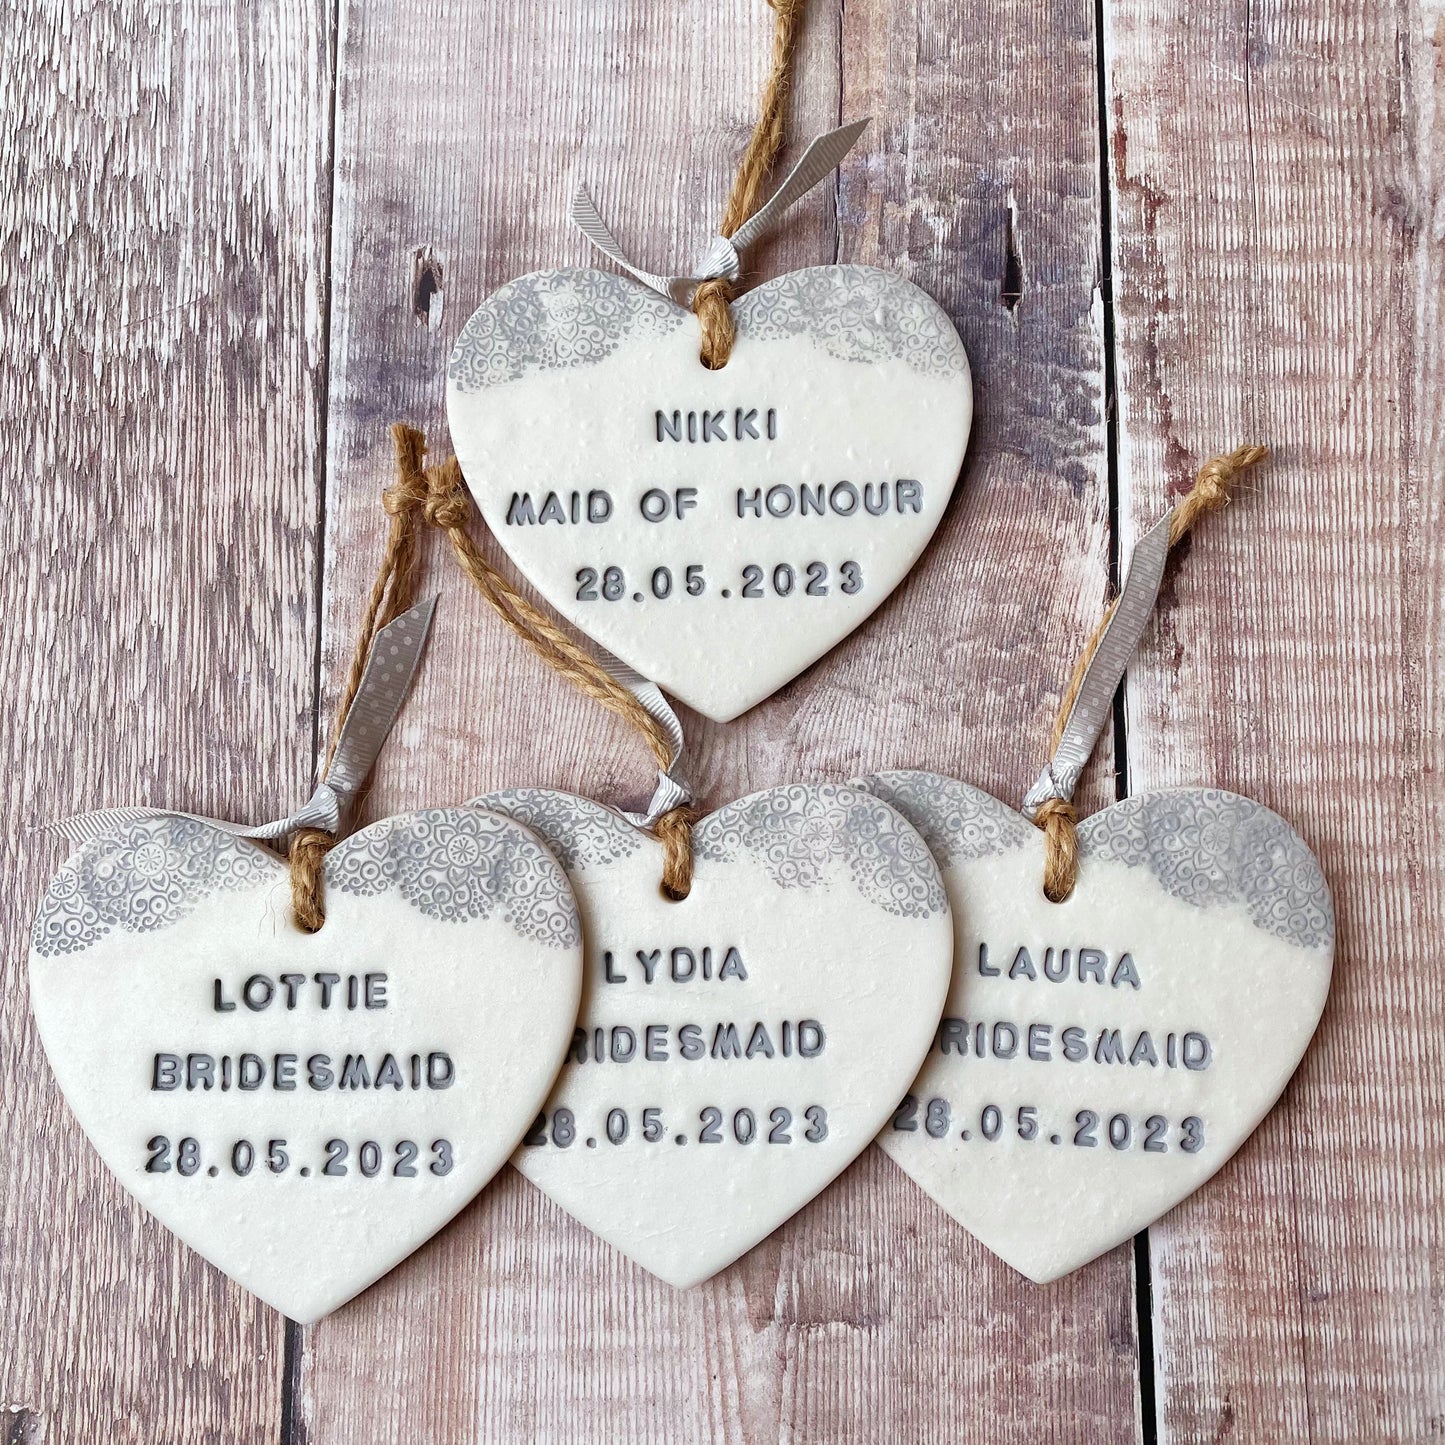 4 Personalised Bridesmaid thank you gifts, pearlised white clay hanging hearts with a grey lace edge at the top of the heart, the hearts are personalised with NIKKI MAID OF HONOUR 28.05.2023, LAURA BRIDESMAID 28.05.2023, LYDIA BRIDESMAID 28.05.2023 and LOTTIE BRIDESMAID 28.05.2023